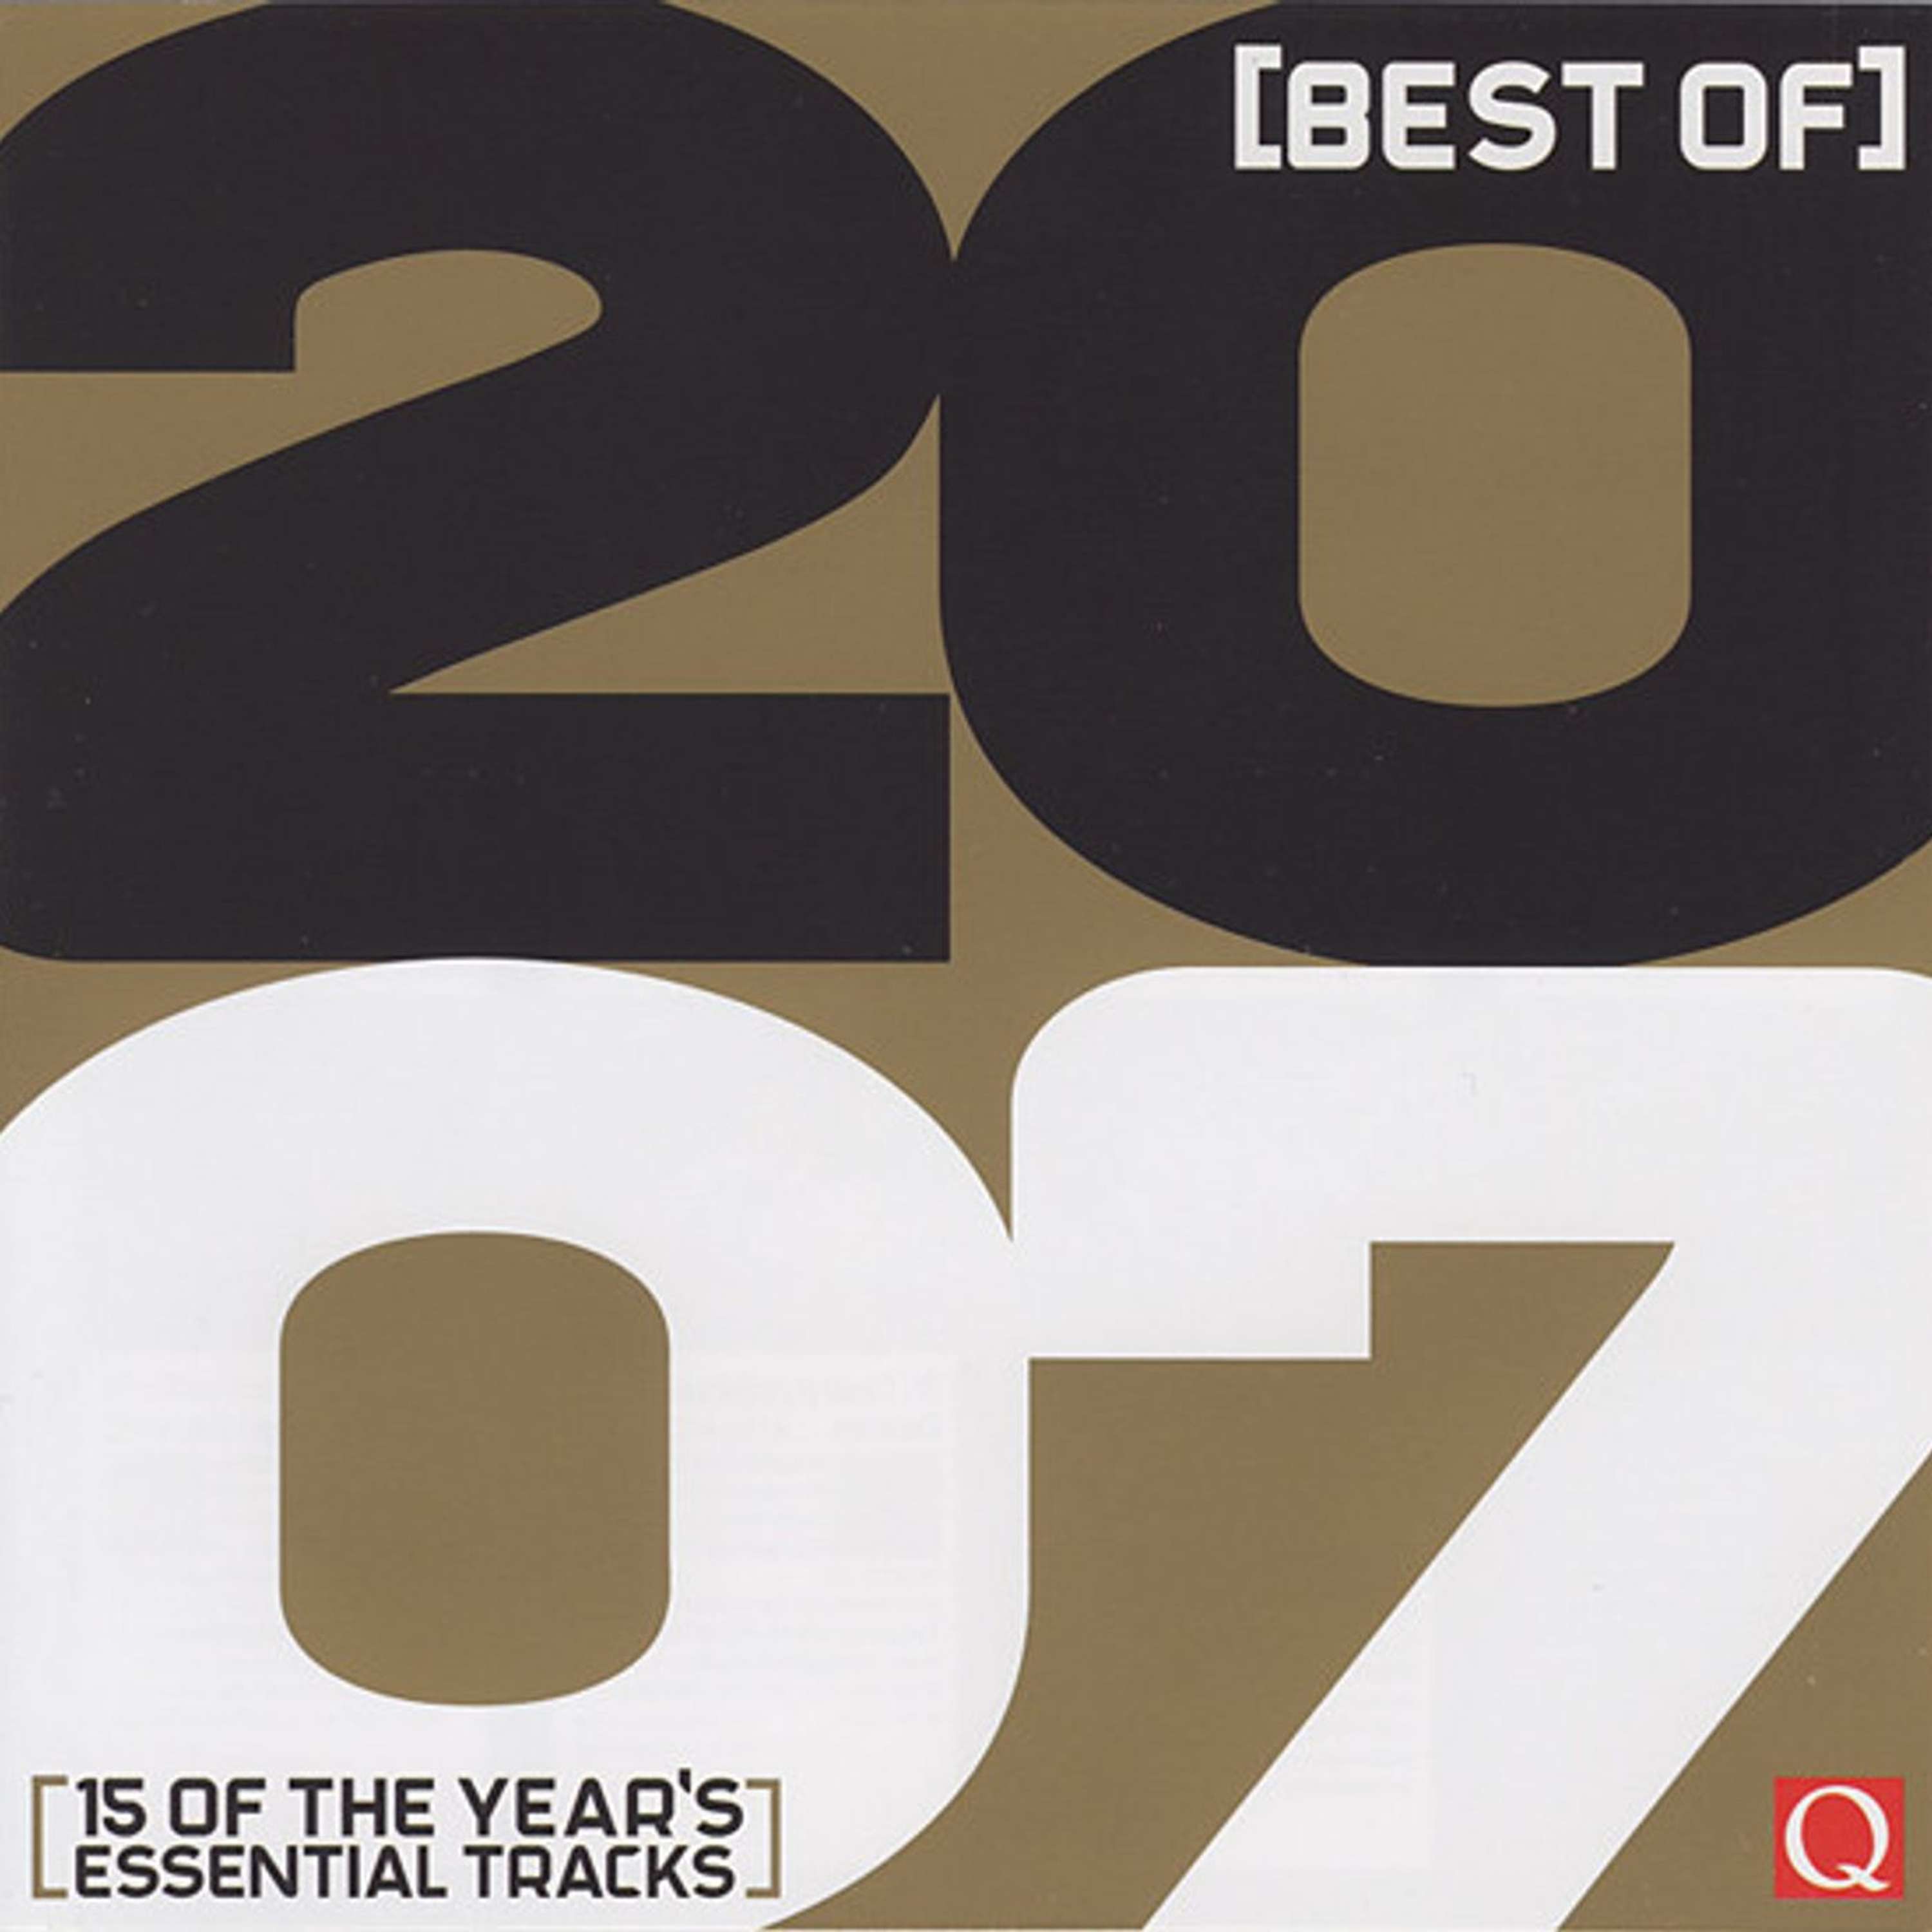 Free With This Months Issue 63 - Bo Nicholson selects Q Best of 2007